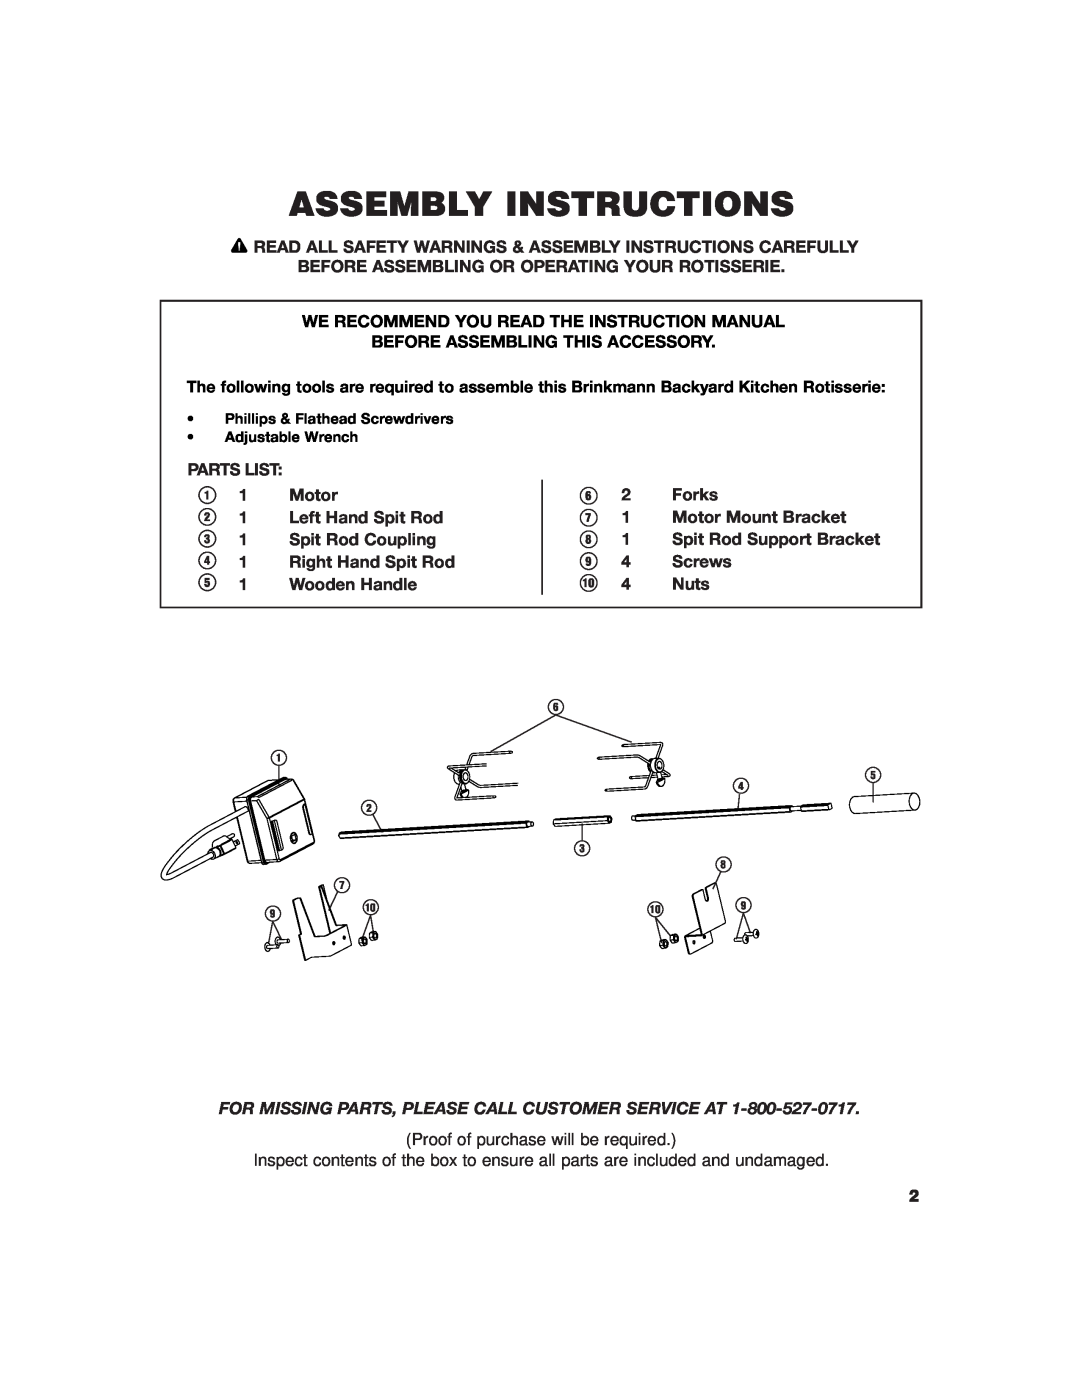 Brinkmann ROTISSERIE owner manual Assembly Instructions 